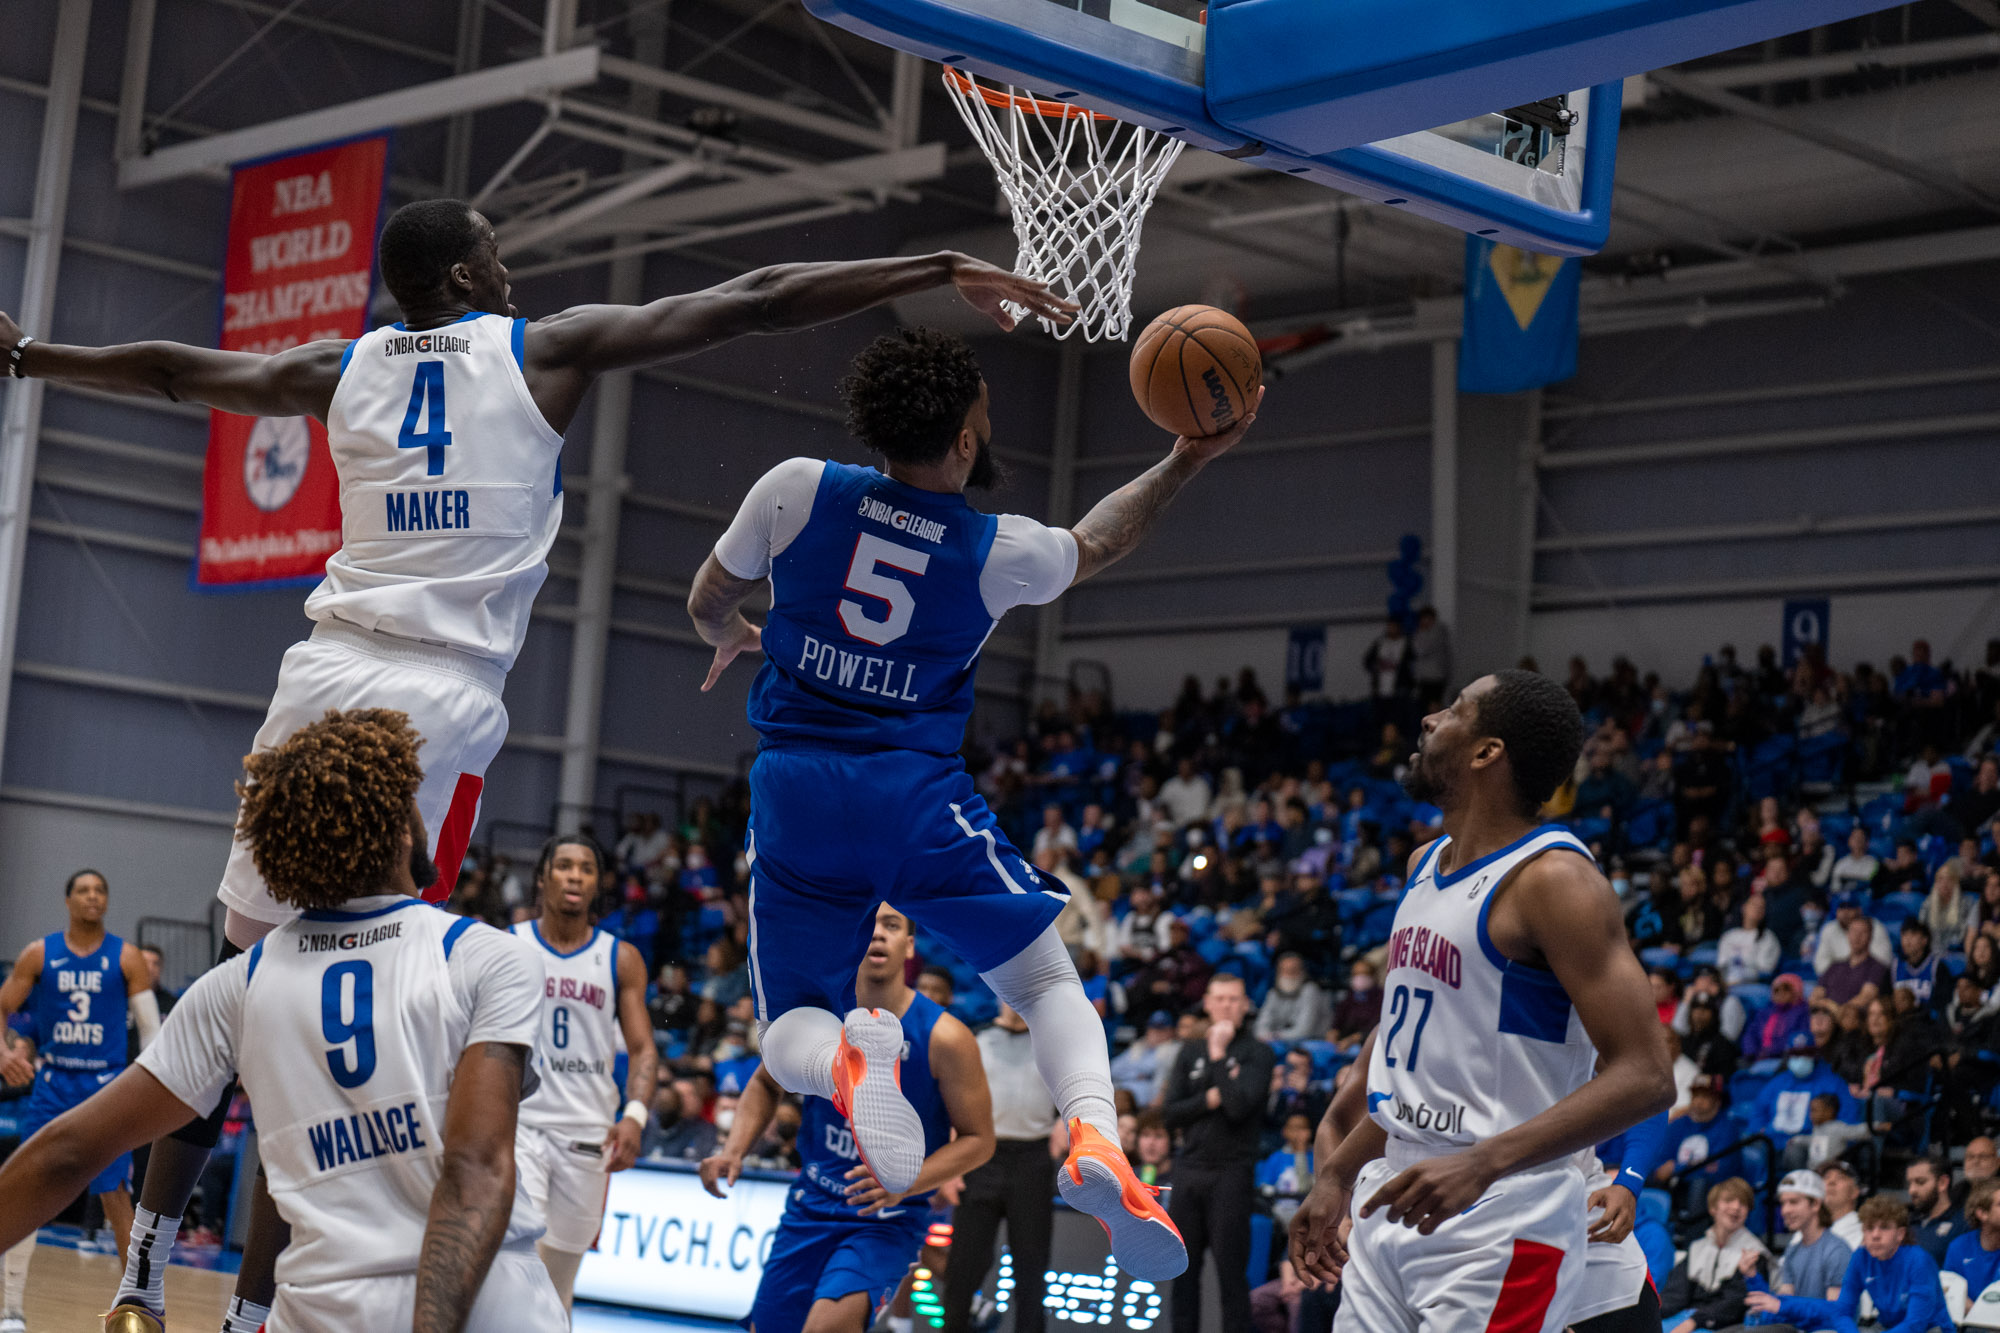 Delaware Blue Coats Continue on in the G League Playoffs